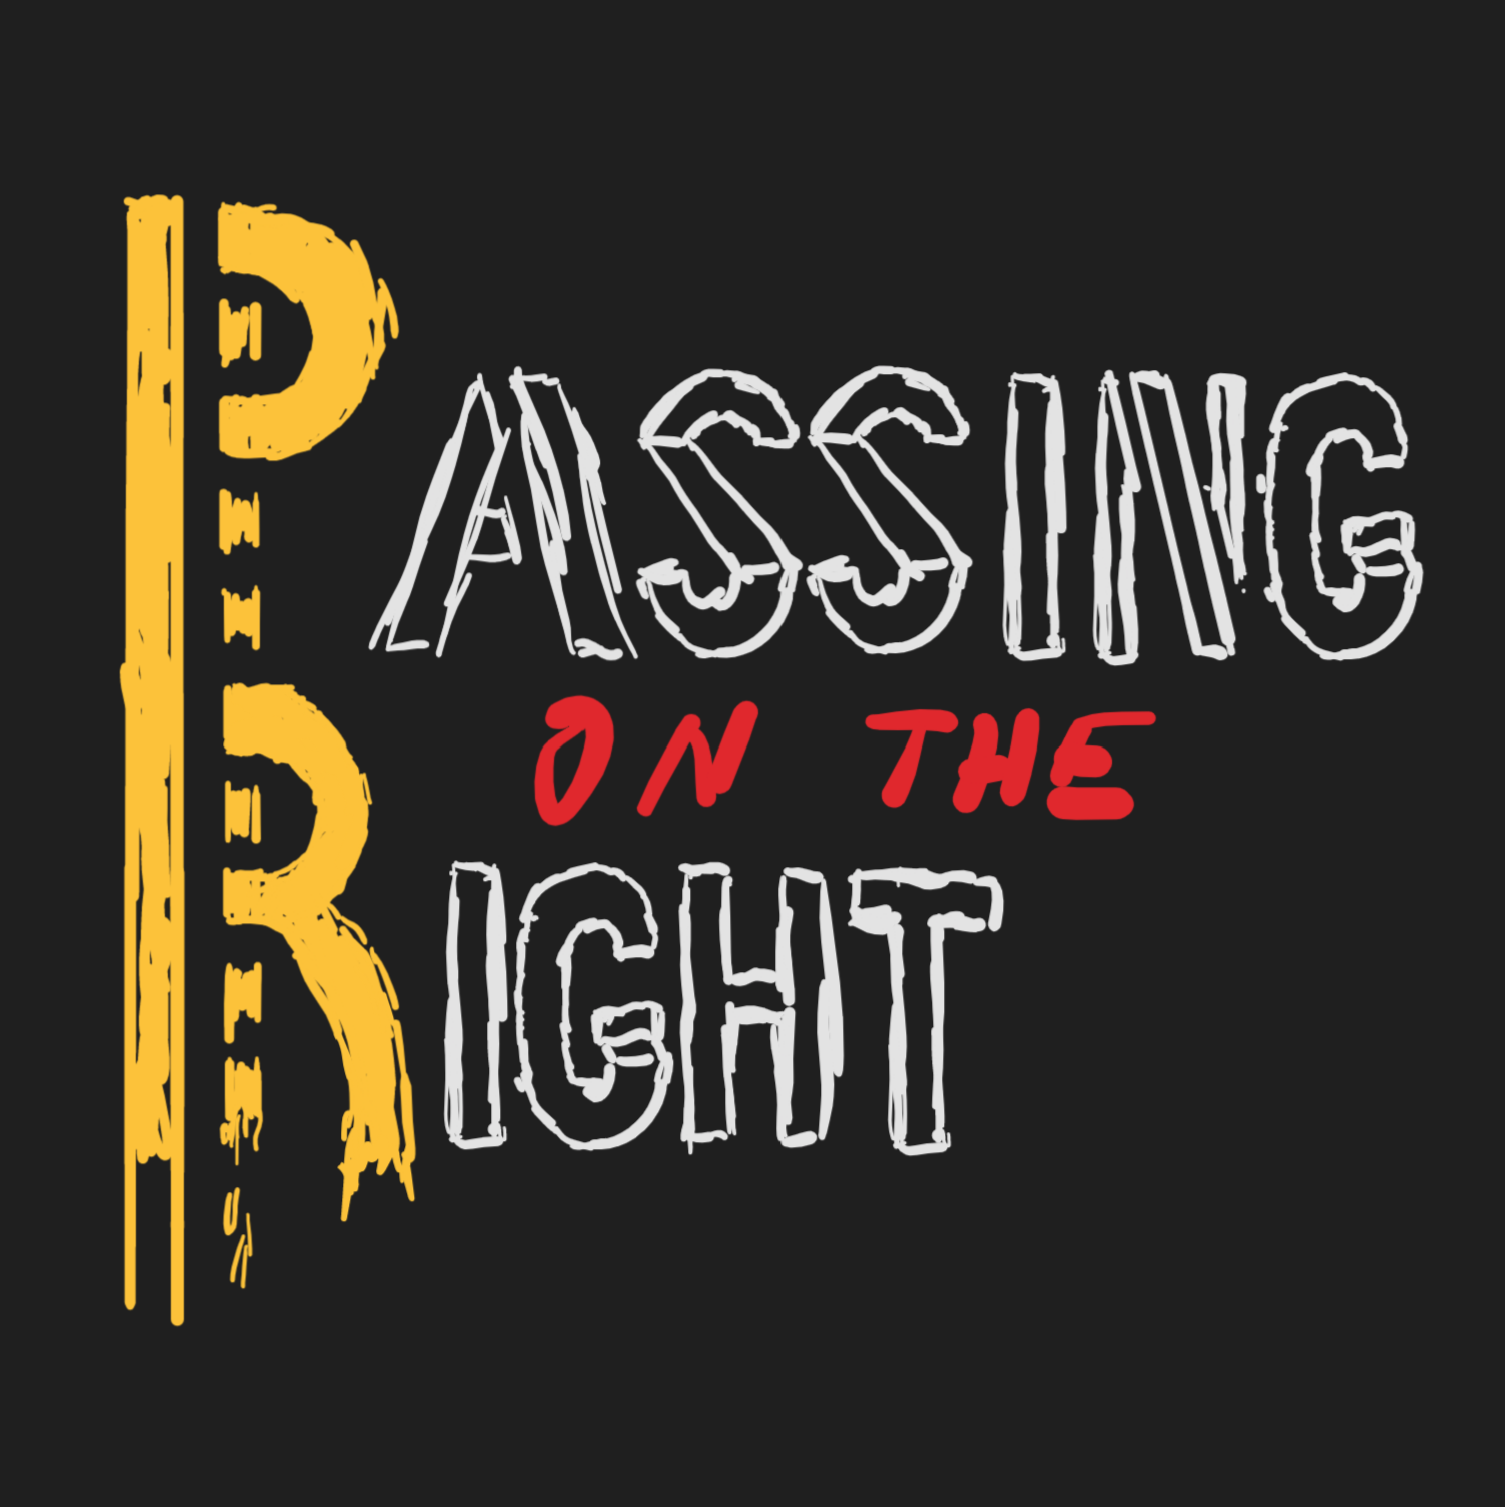 Passing on the Right logo